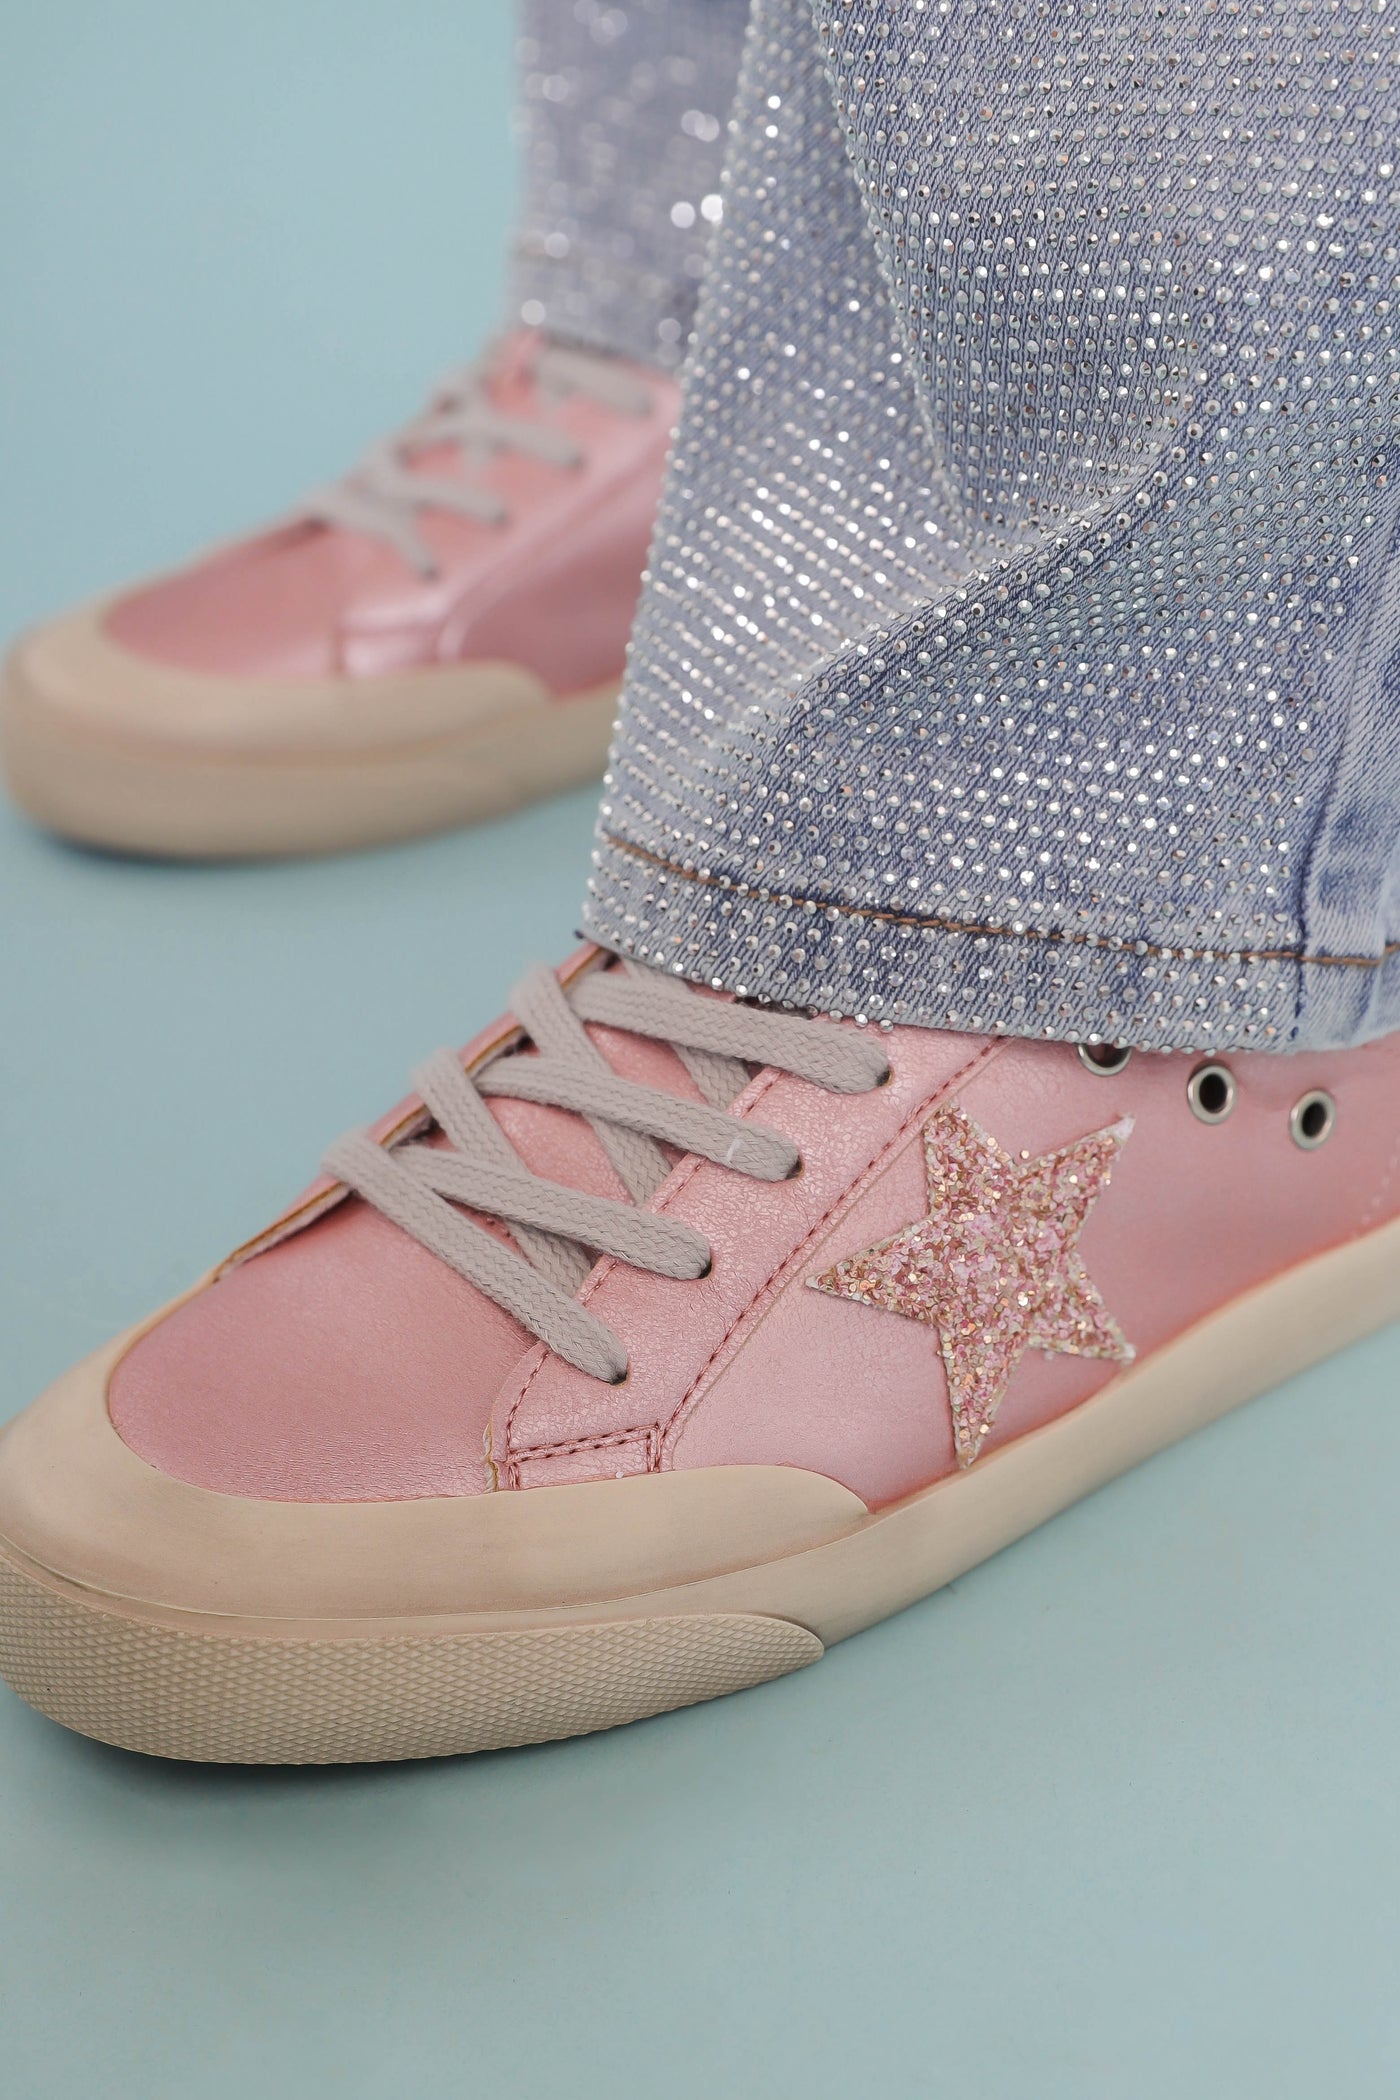 Trendy Star Sneakers- Women's Blush Pink Star Sneakers- MiMi Shoes